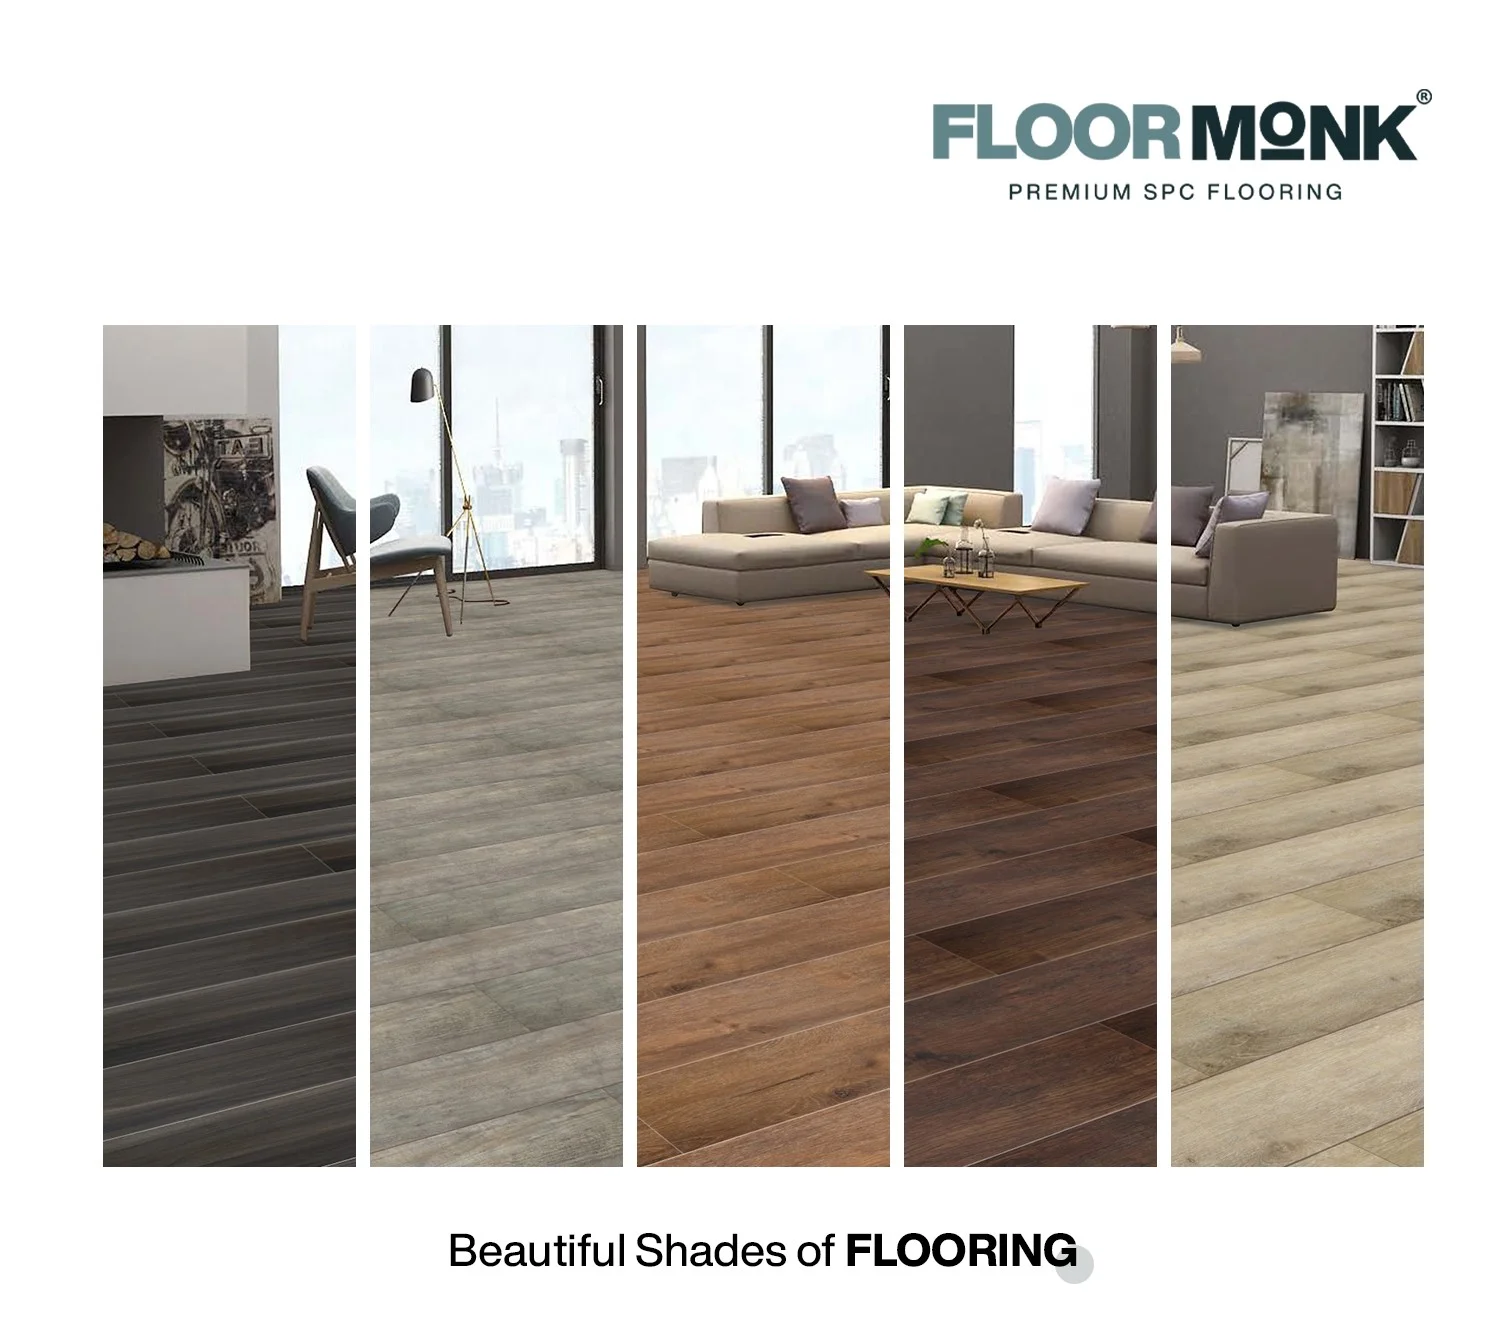 Comprehensive Range of Designs and Finishes of SPC Flooring